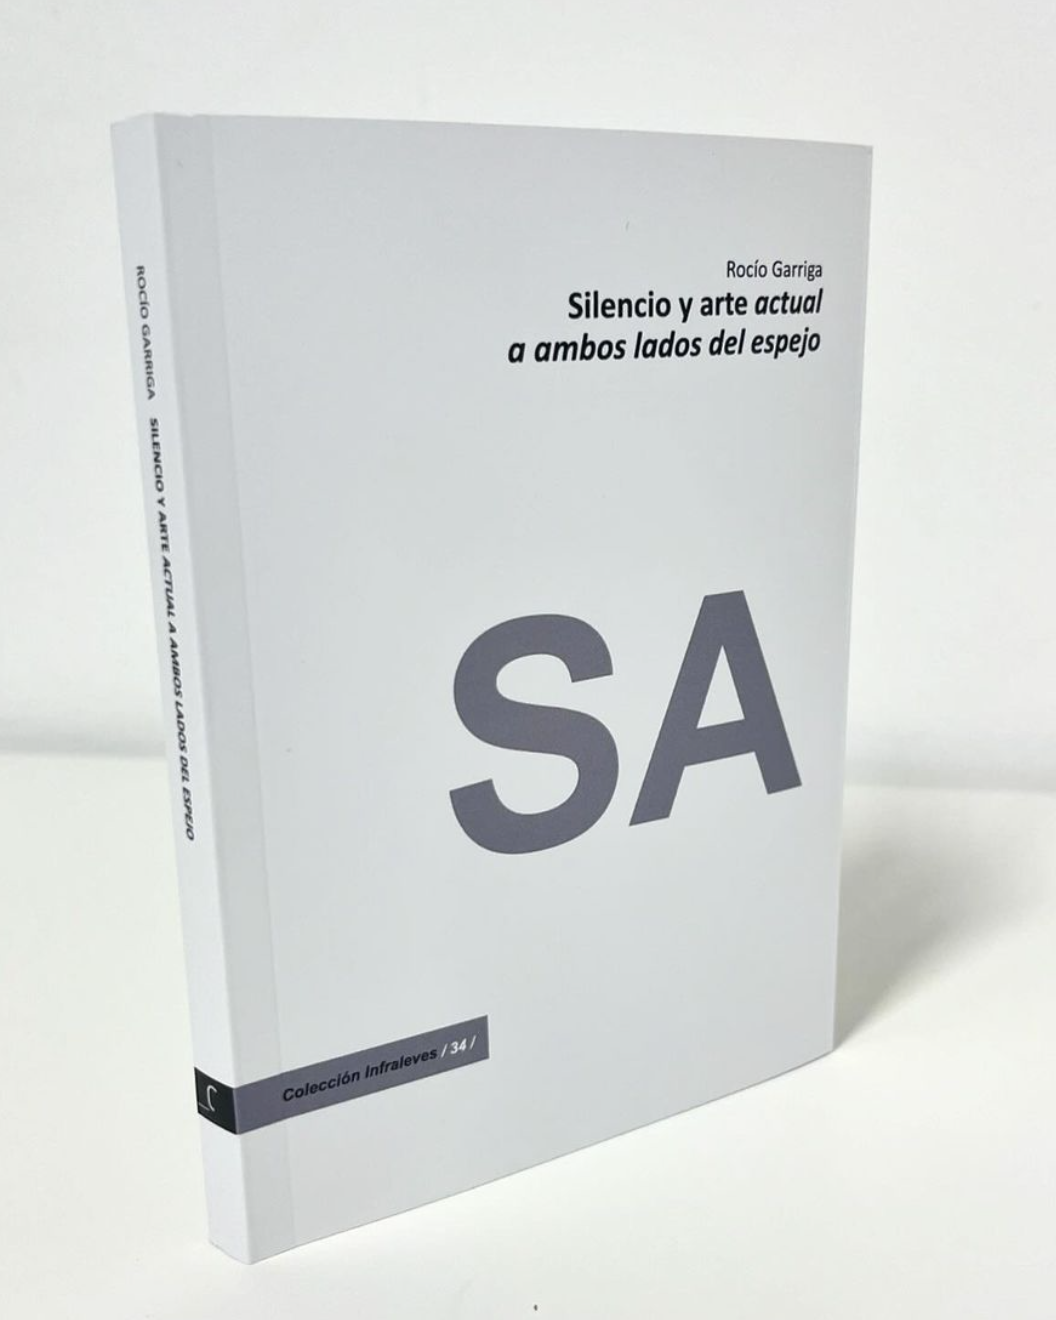 CENDEAC publishes Rocio Garriga's book "Silence and contemporary art: on the other side of the mirror"